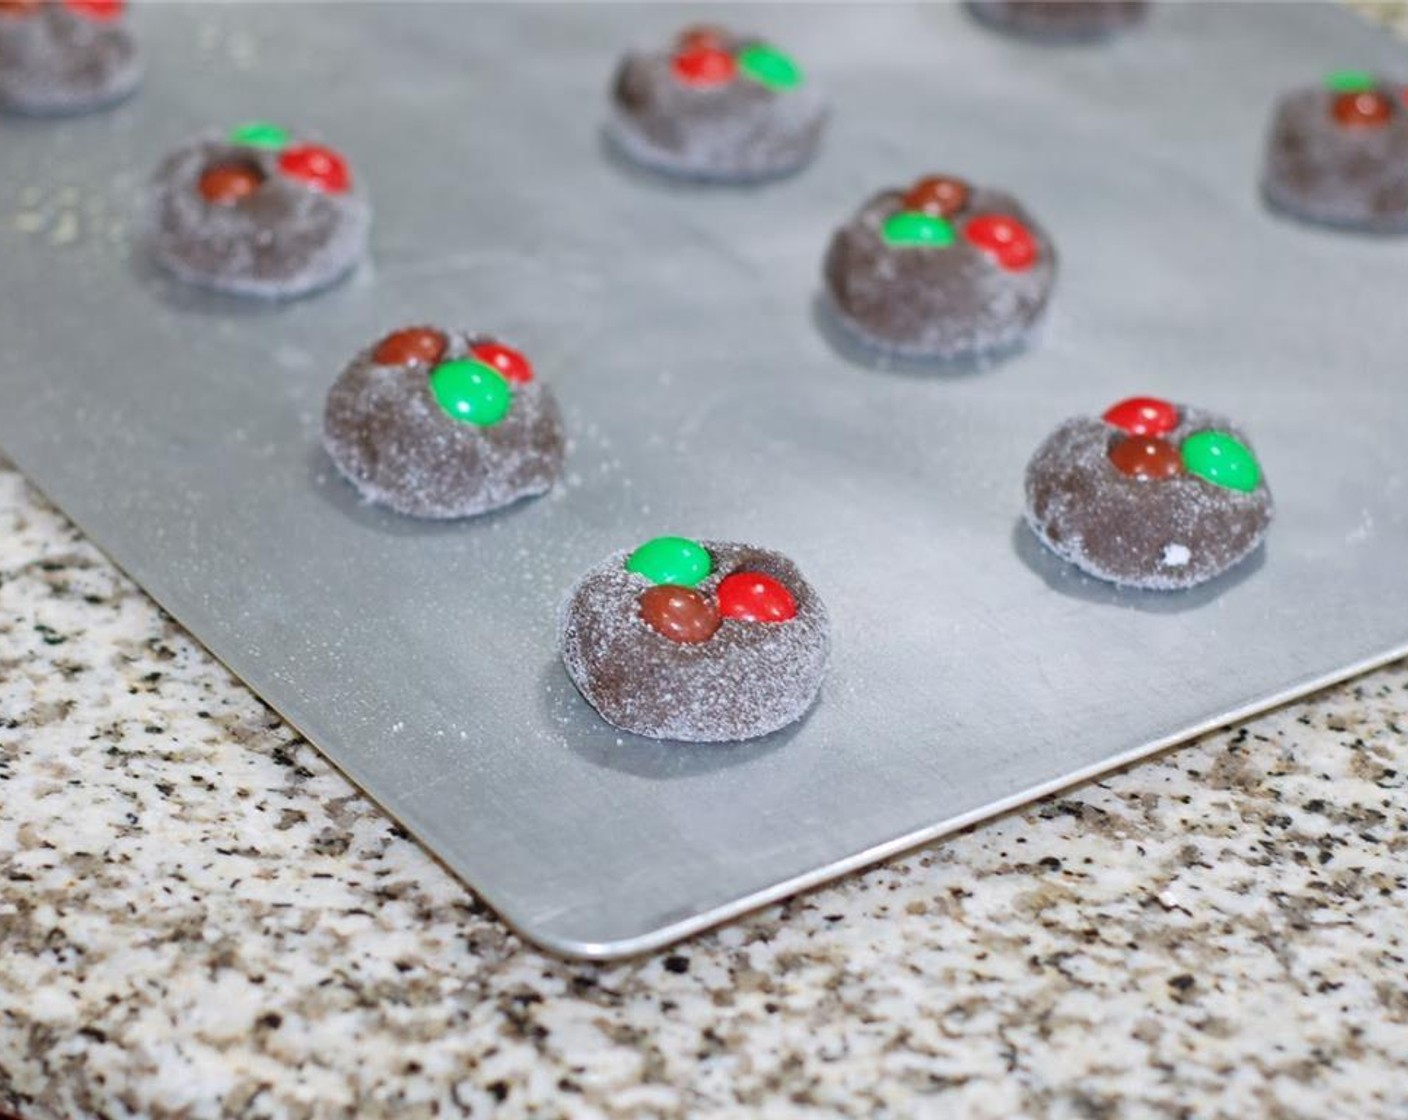 step 6 Bake 10 minutes at 375 degrees F (190 degrees C). Remove from the oven and place on cooling racks until completely cooled. You can eat the remaining M&Ms while you wait!